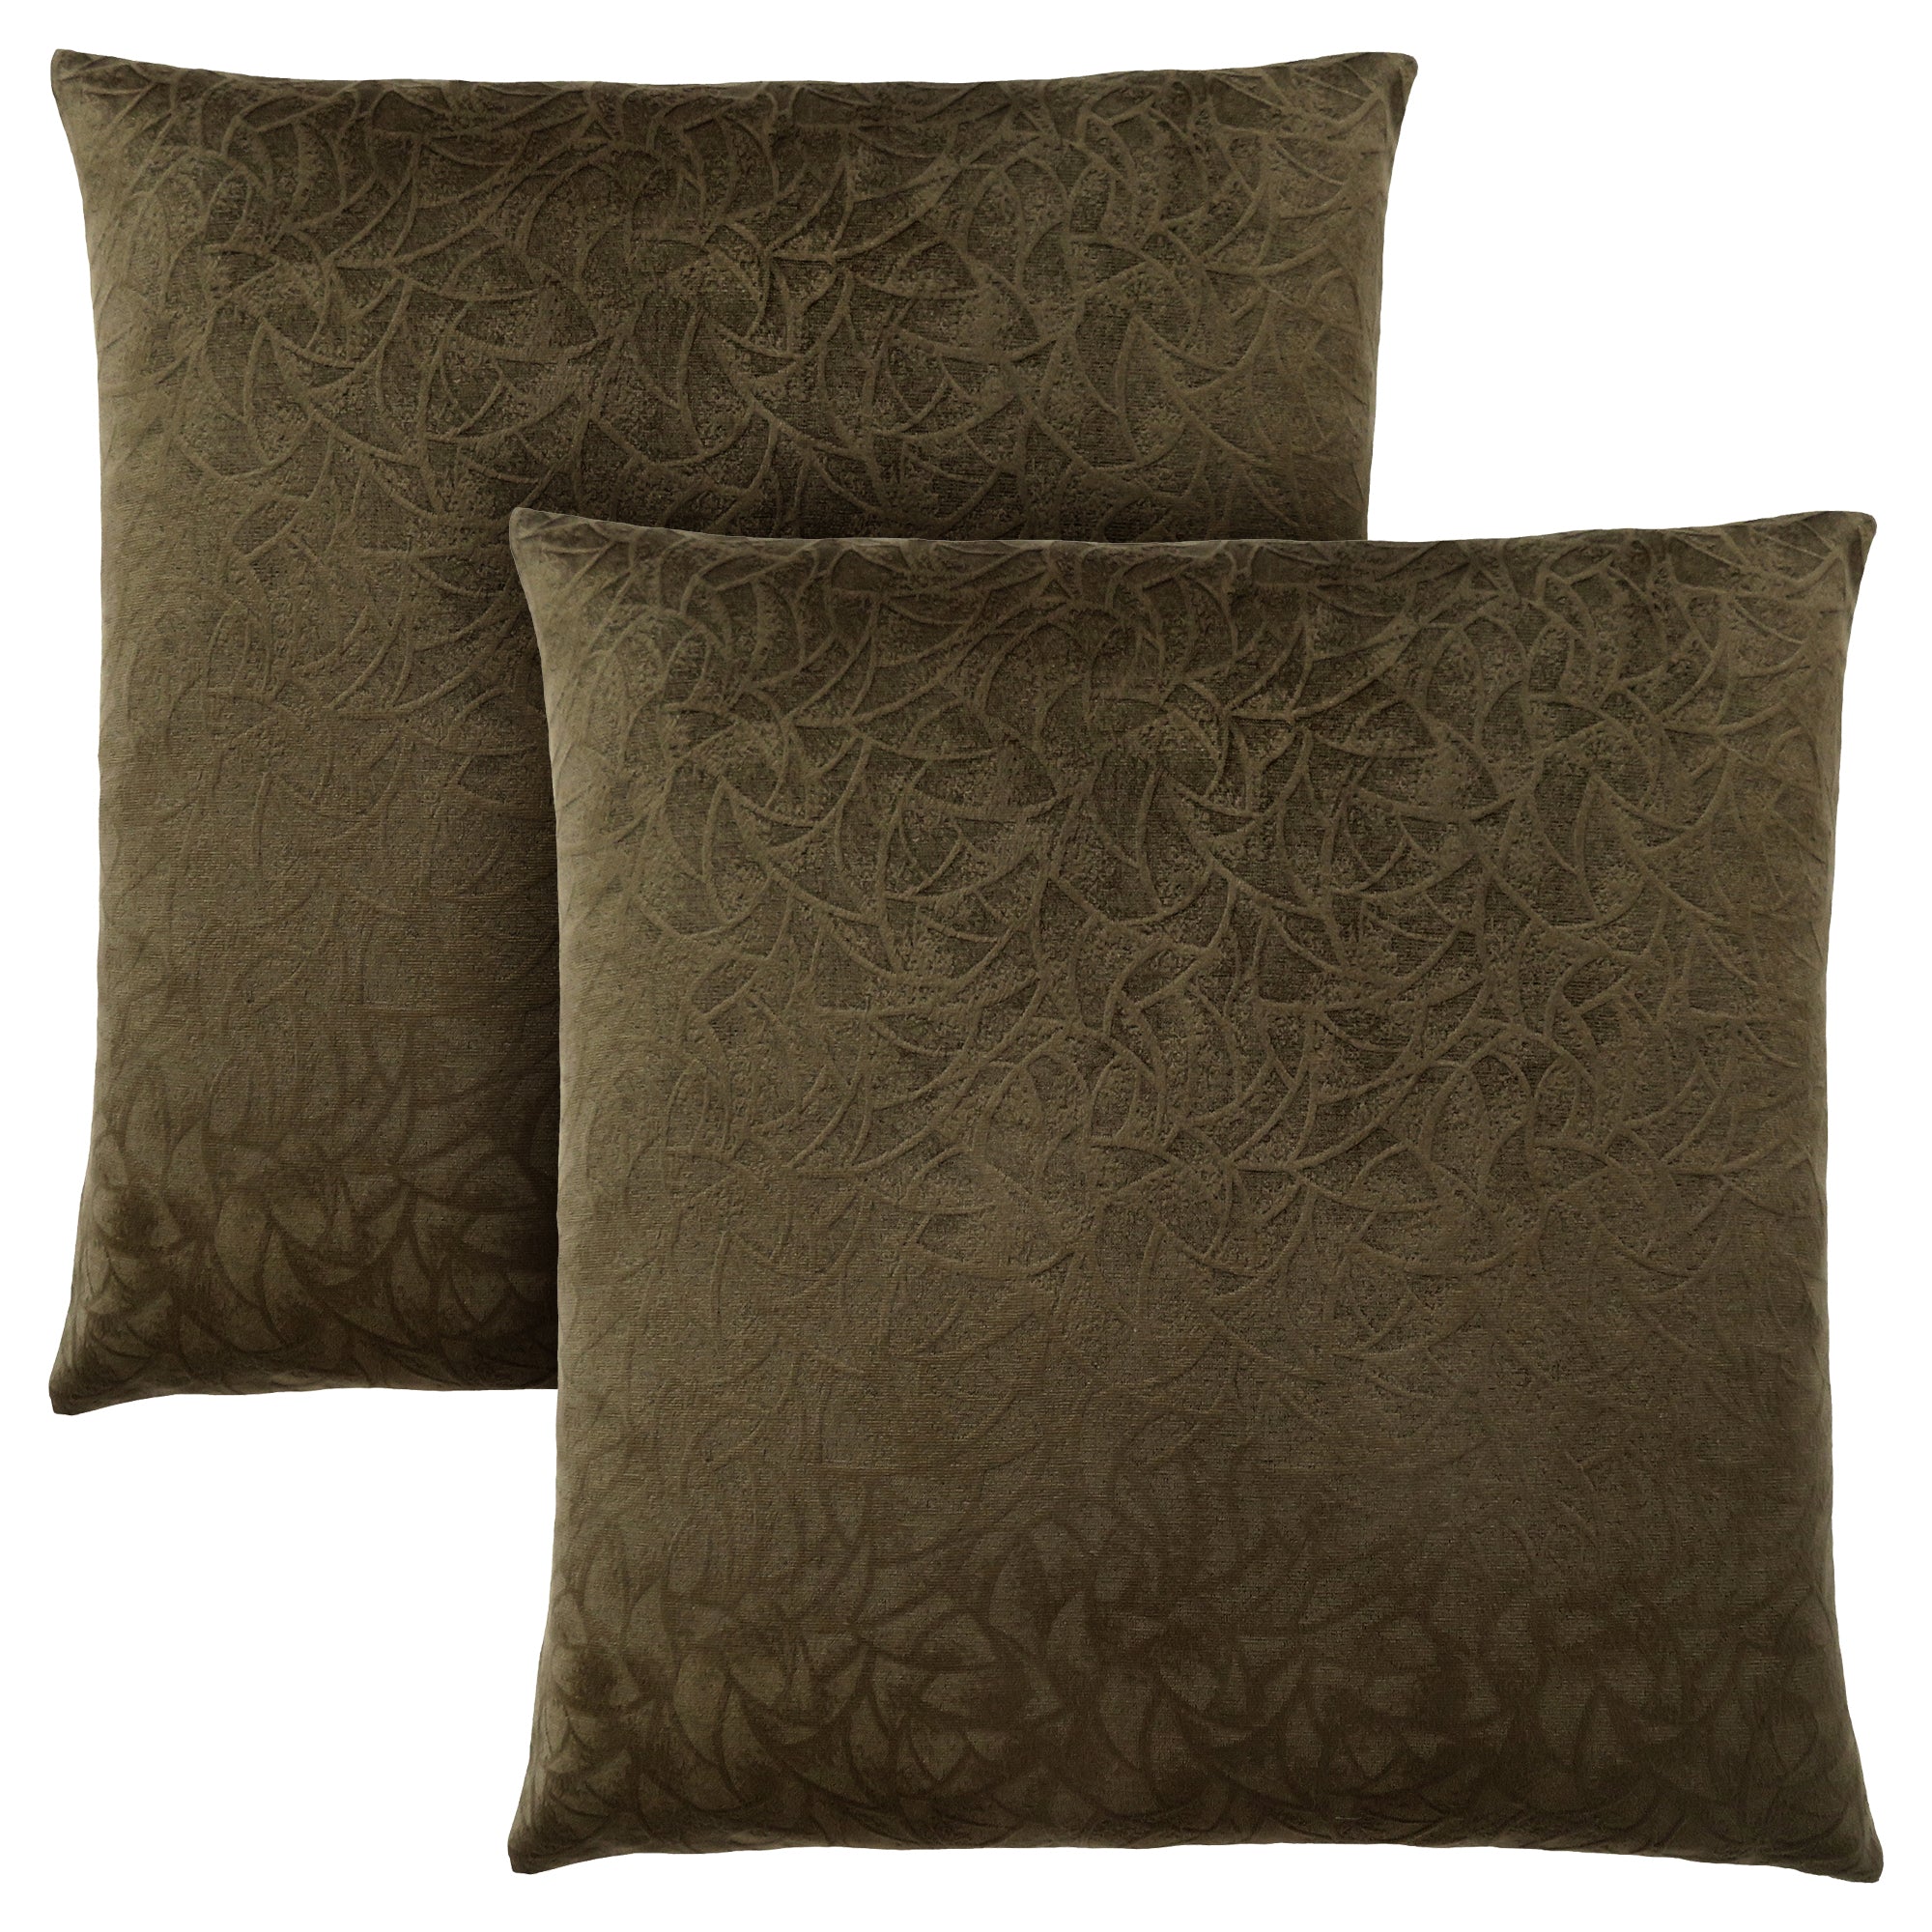 MN-629263    Pillows, Set Of 2, 18 X 18 Square, Insert Included, Decorative Throw, Accent, Sofa, Couch, Bed, Soft Polyester Woven Fabric, Hypoallergenic Soft Polyester Insert, Dark Green, Transitional